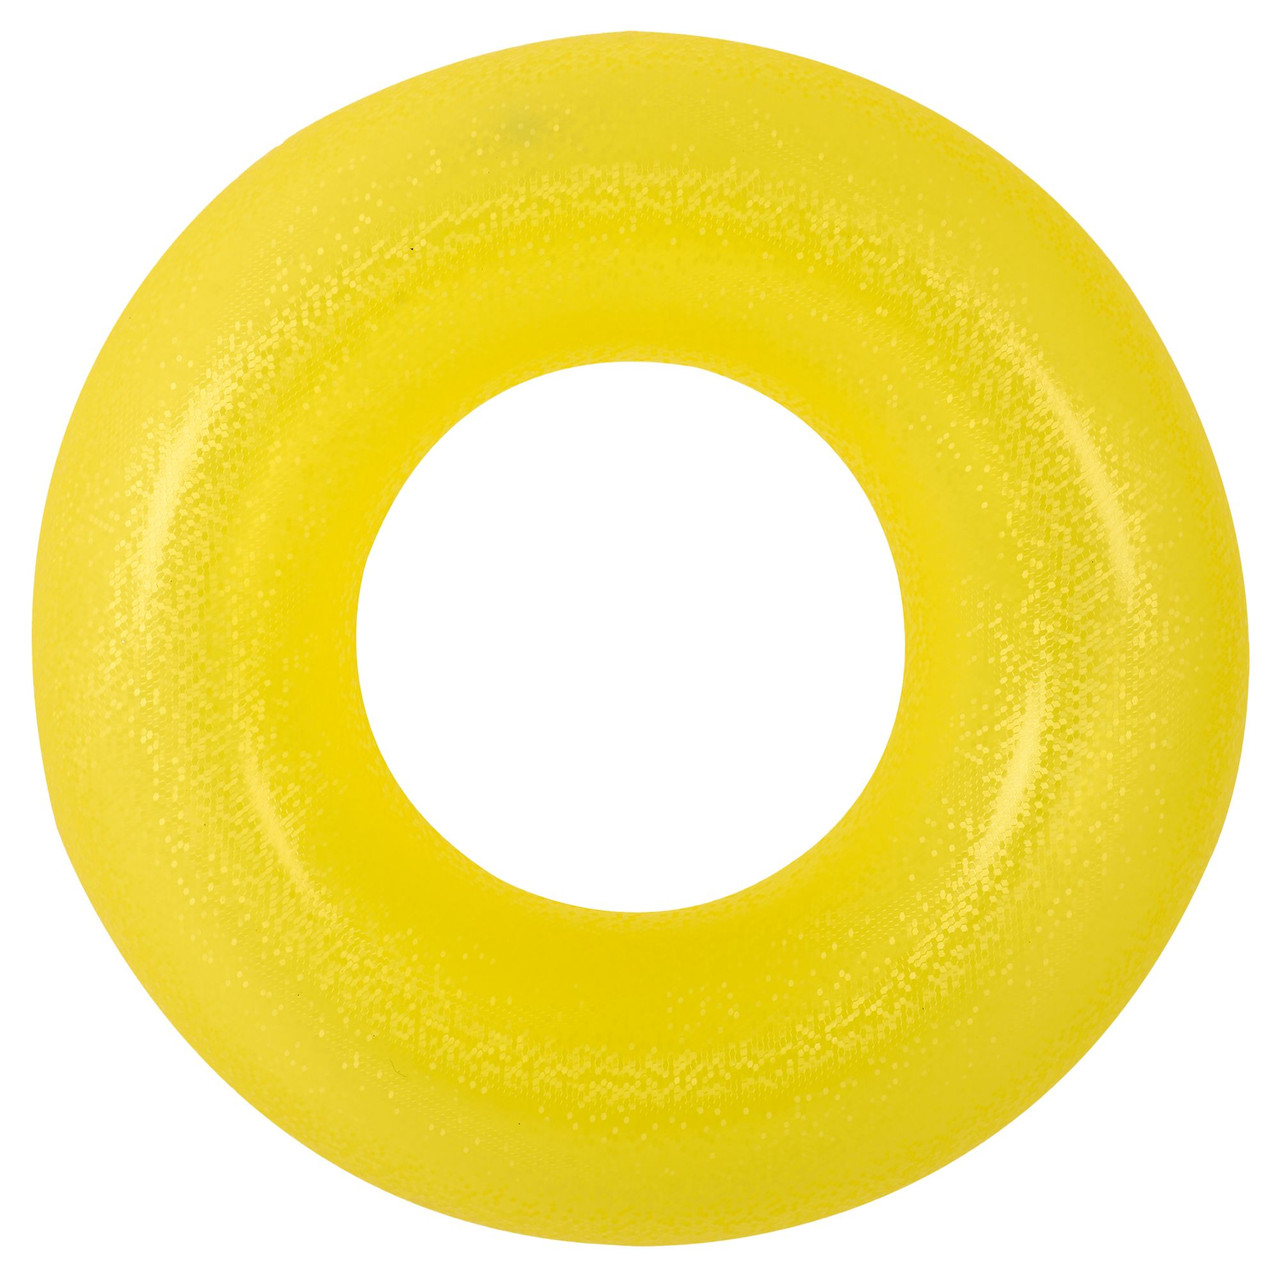 30-Inch Inflatable Bright Yellow Swim Ring Tube Pool Float for